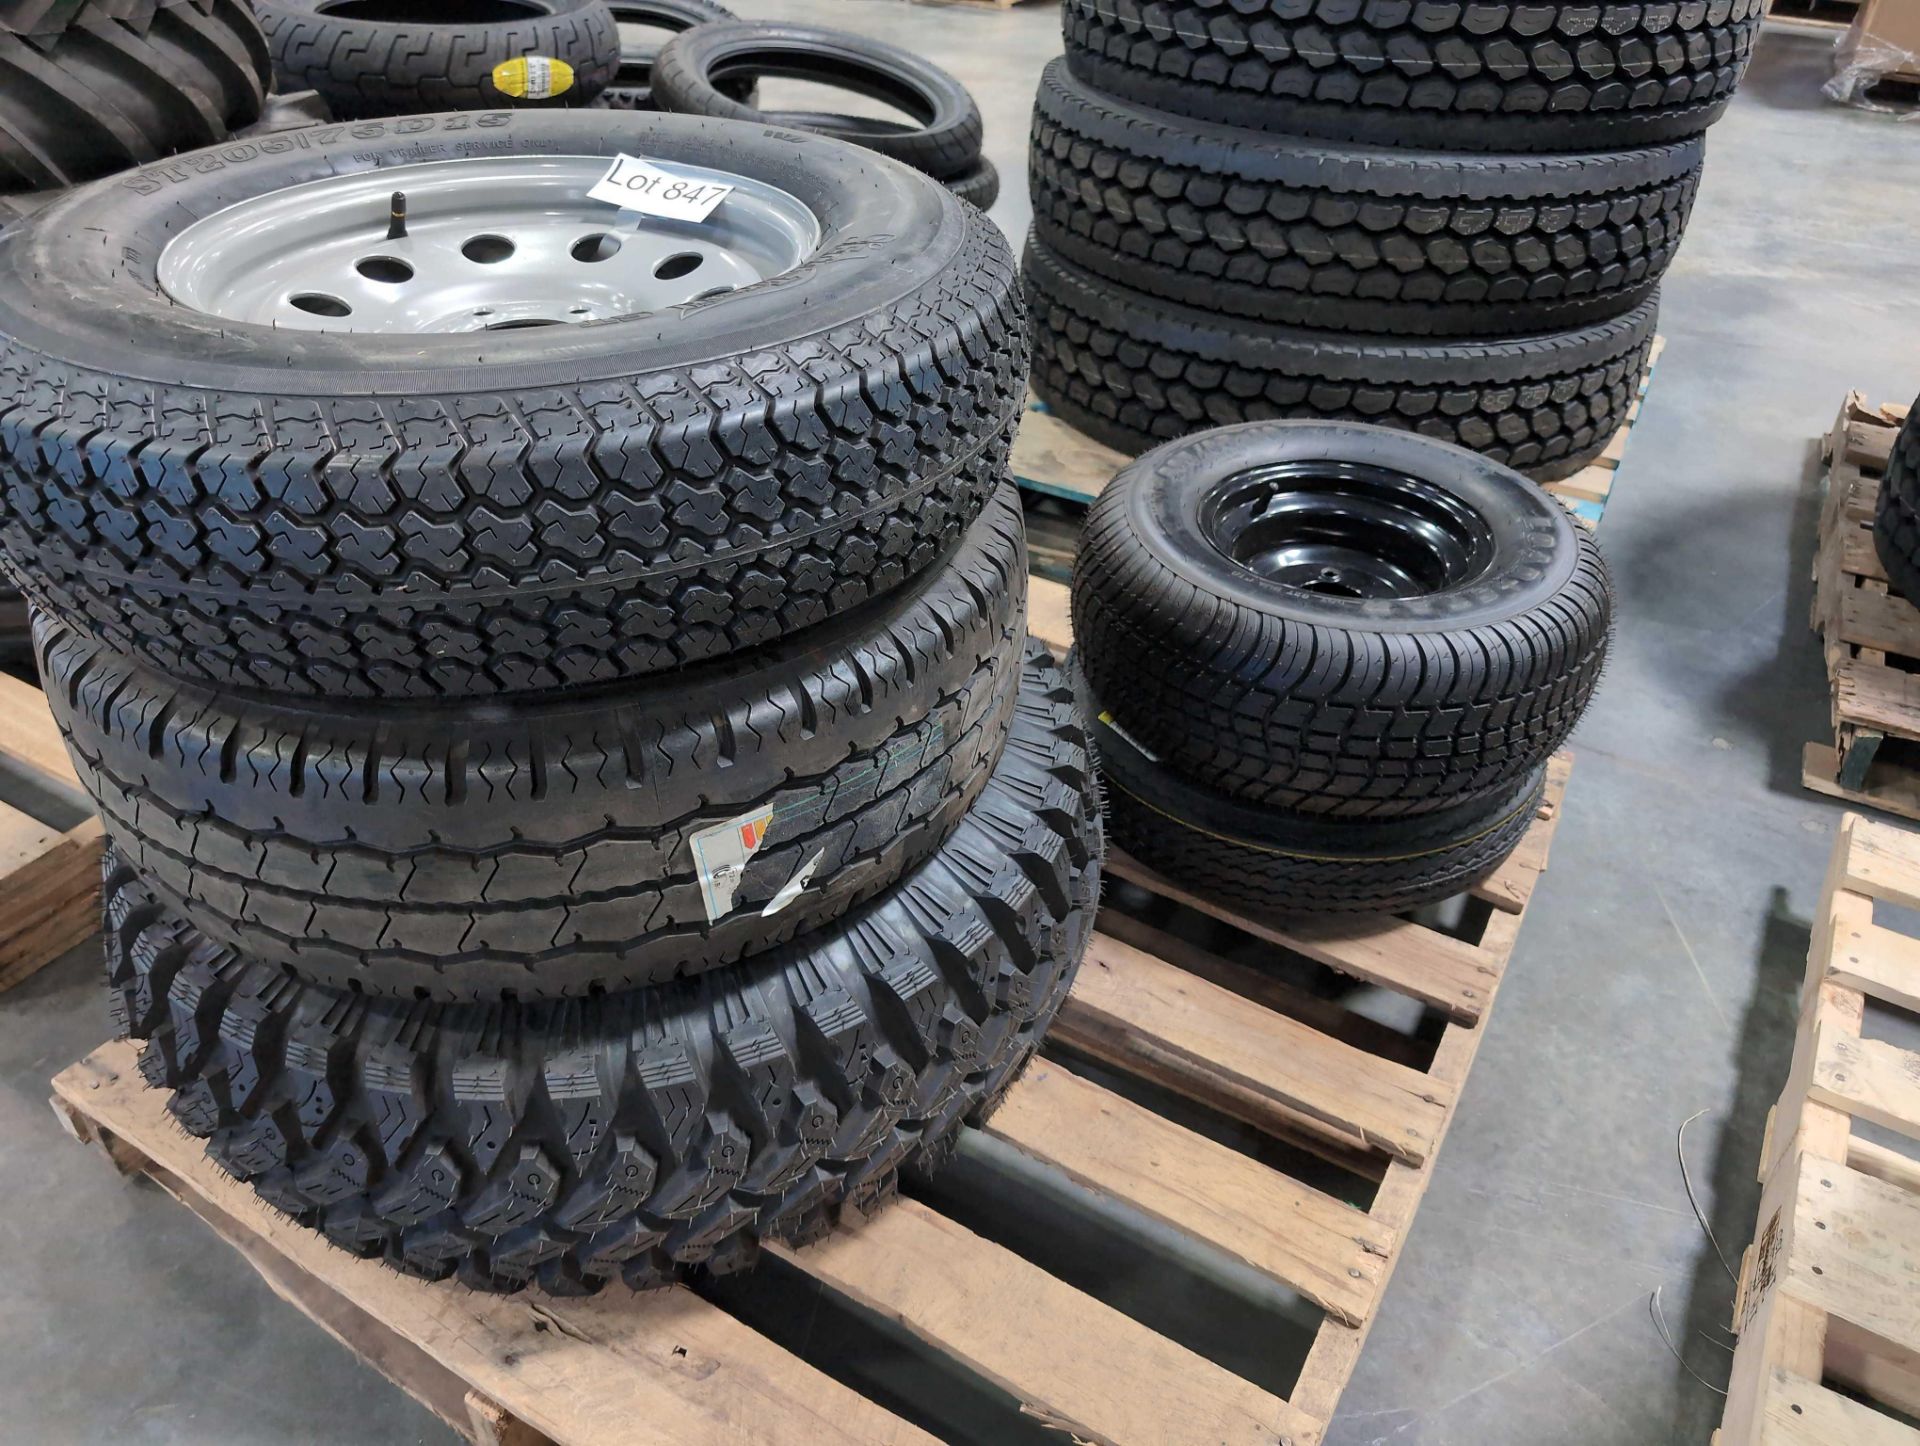 pallet of tires with rims - Image 7 of 11